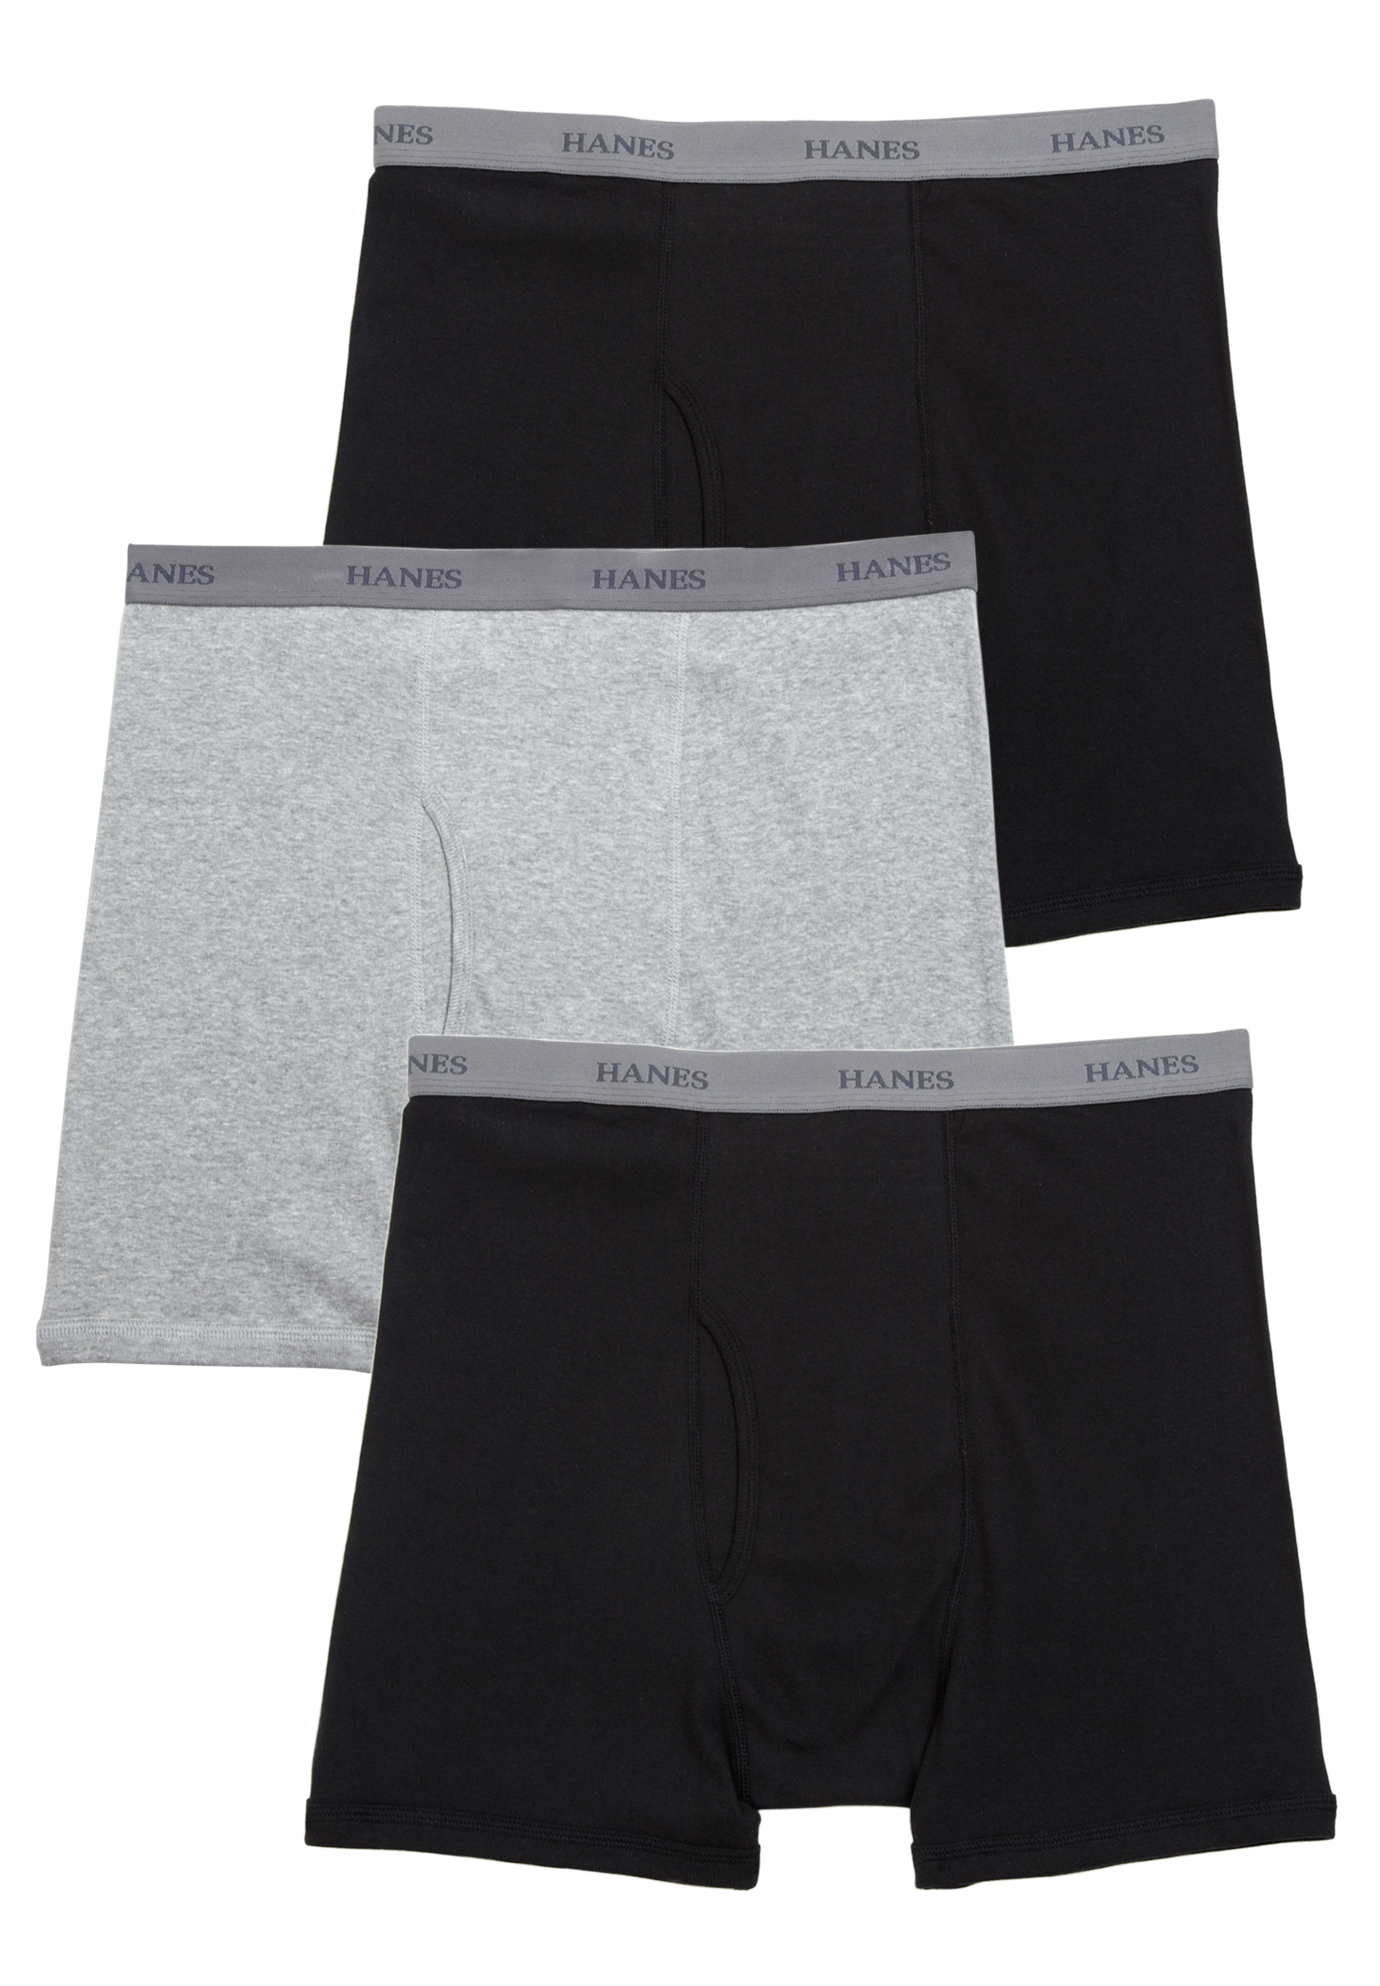 hanes boxer briefs our most comfortable